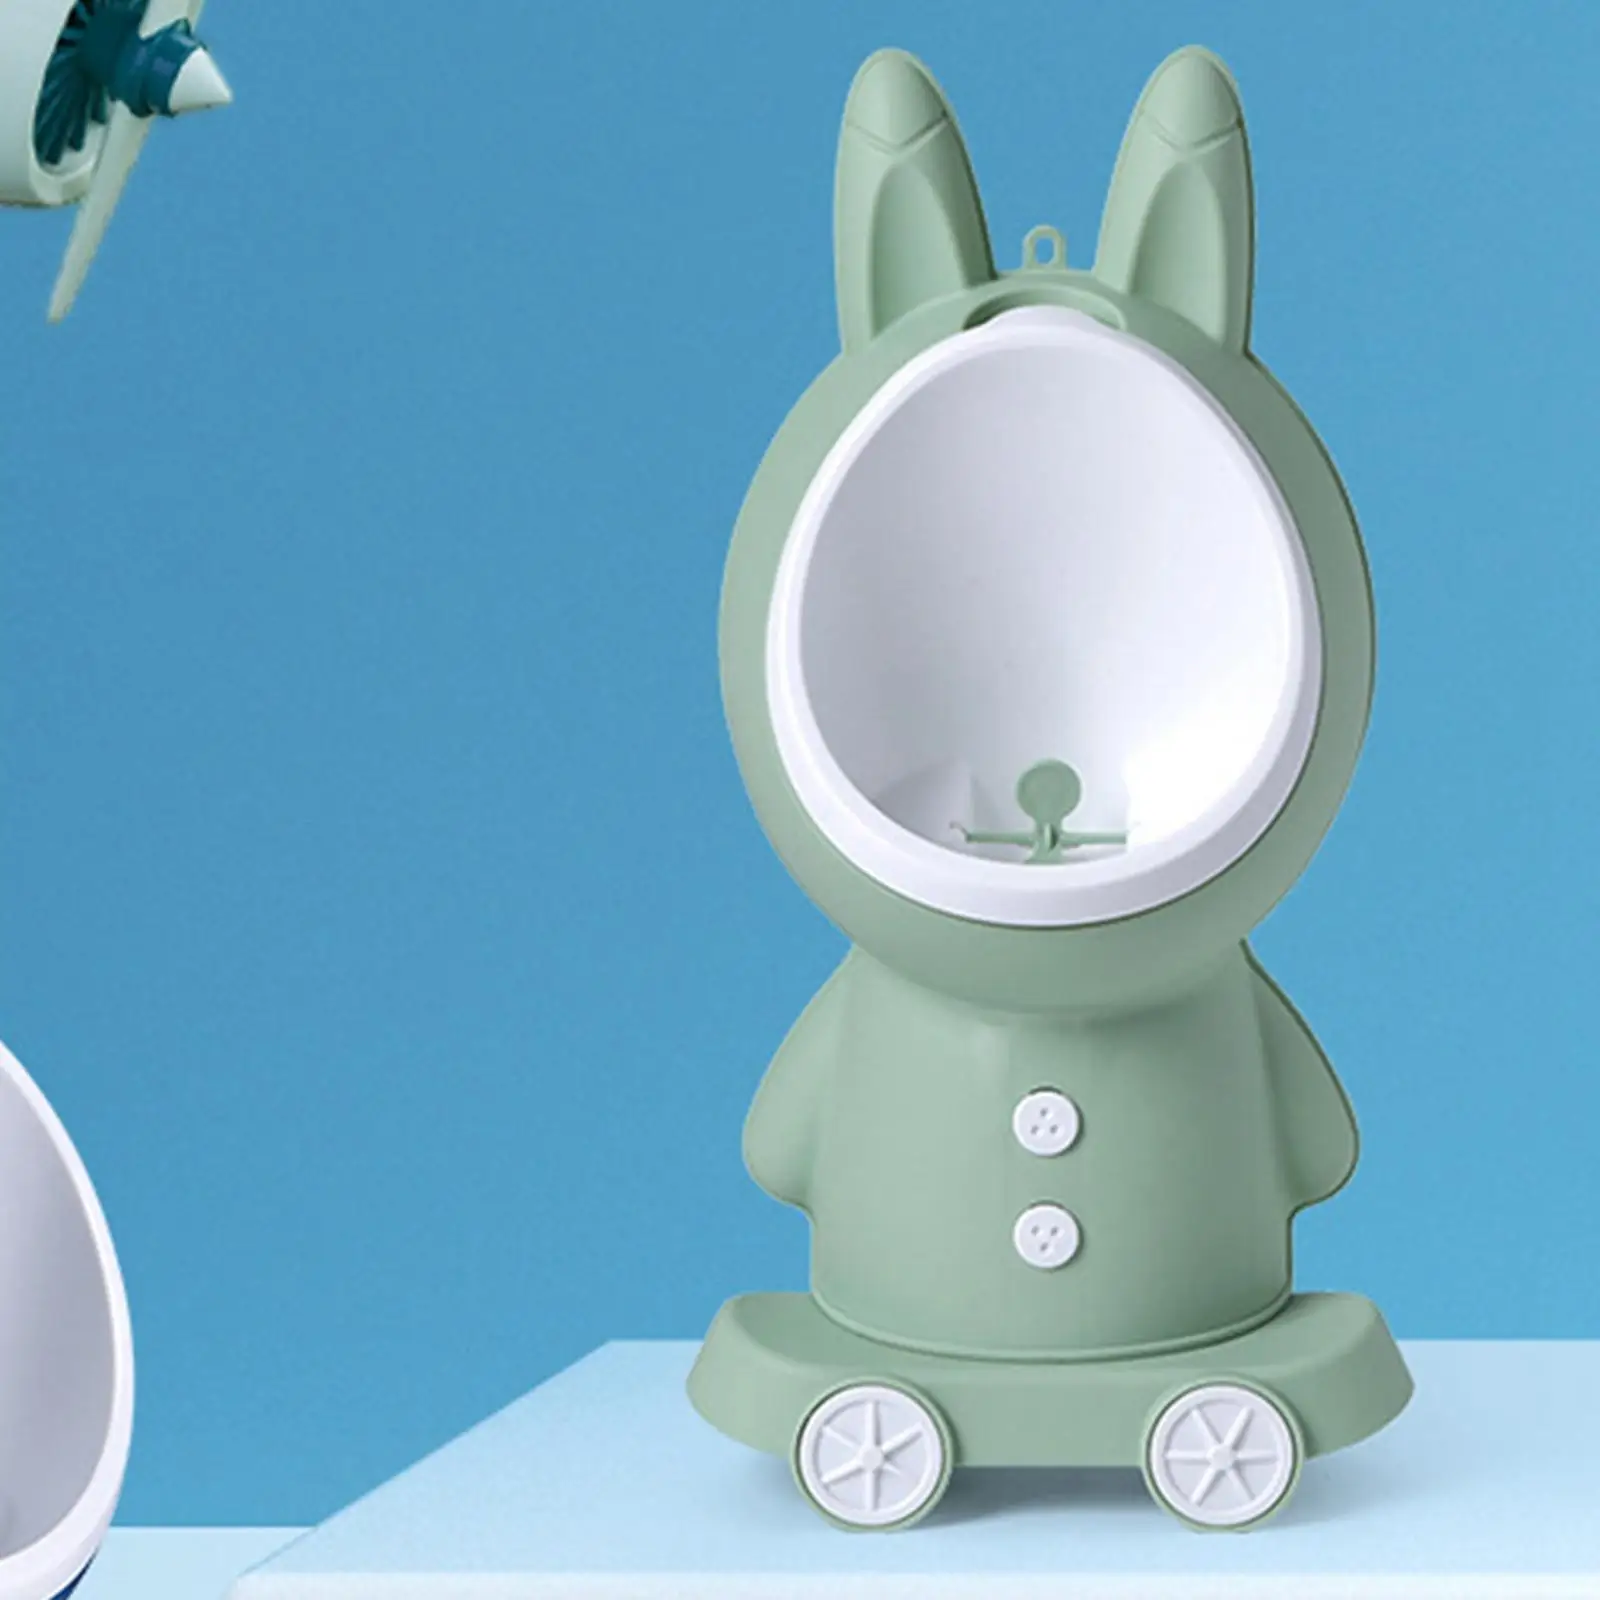 Potty Urinal with  for Boys Toddler, Kids Urinal Pee Trainer with Funny Aiming Target